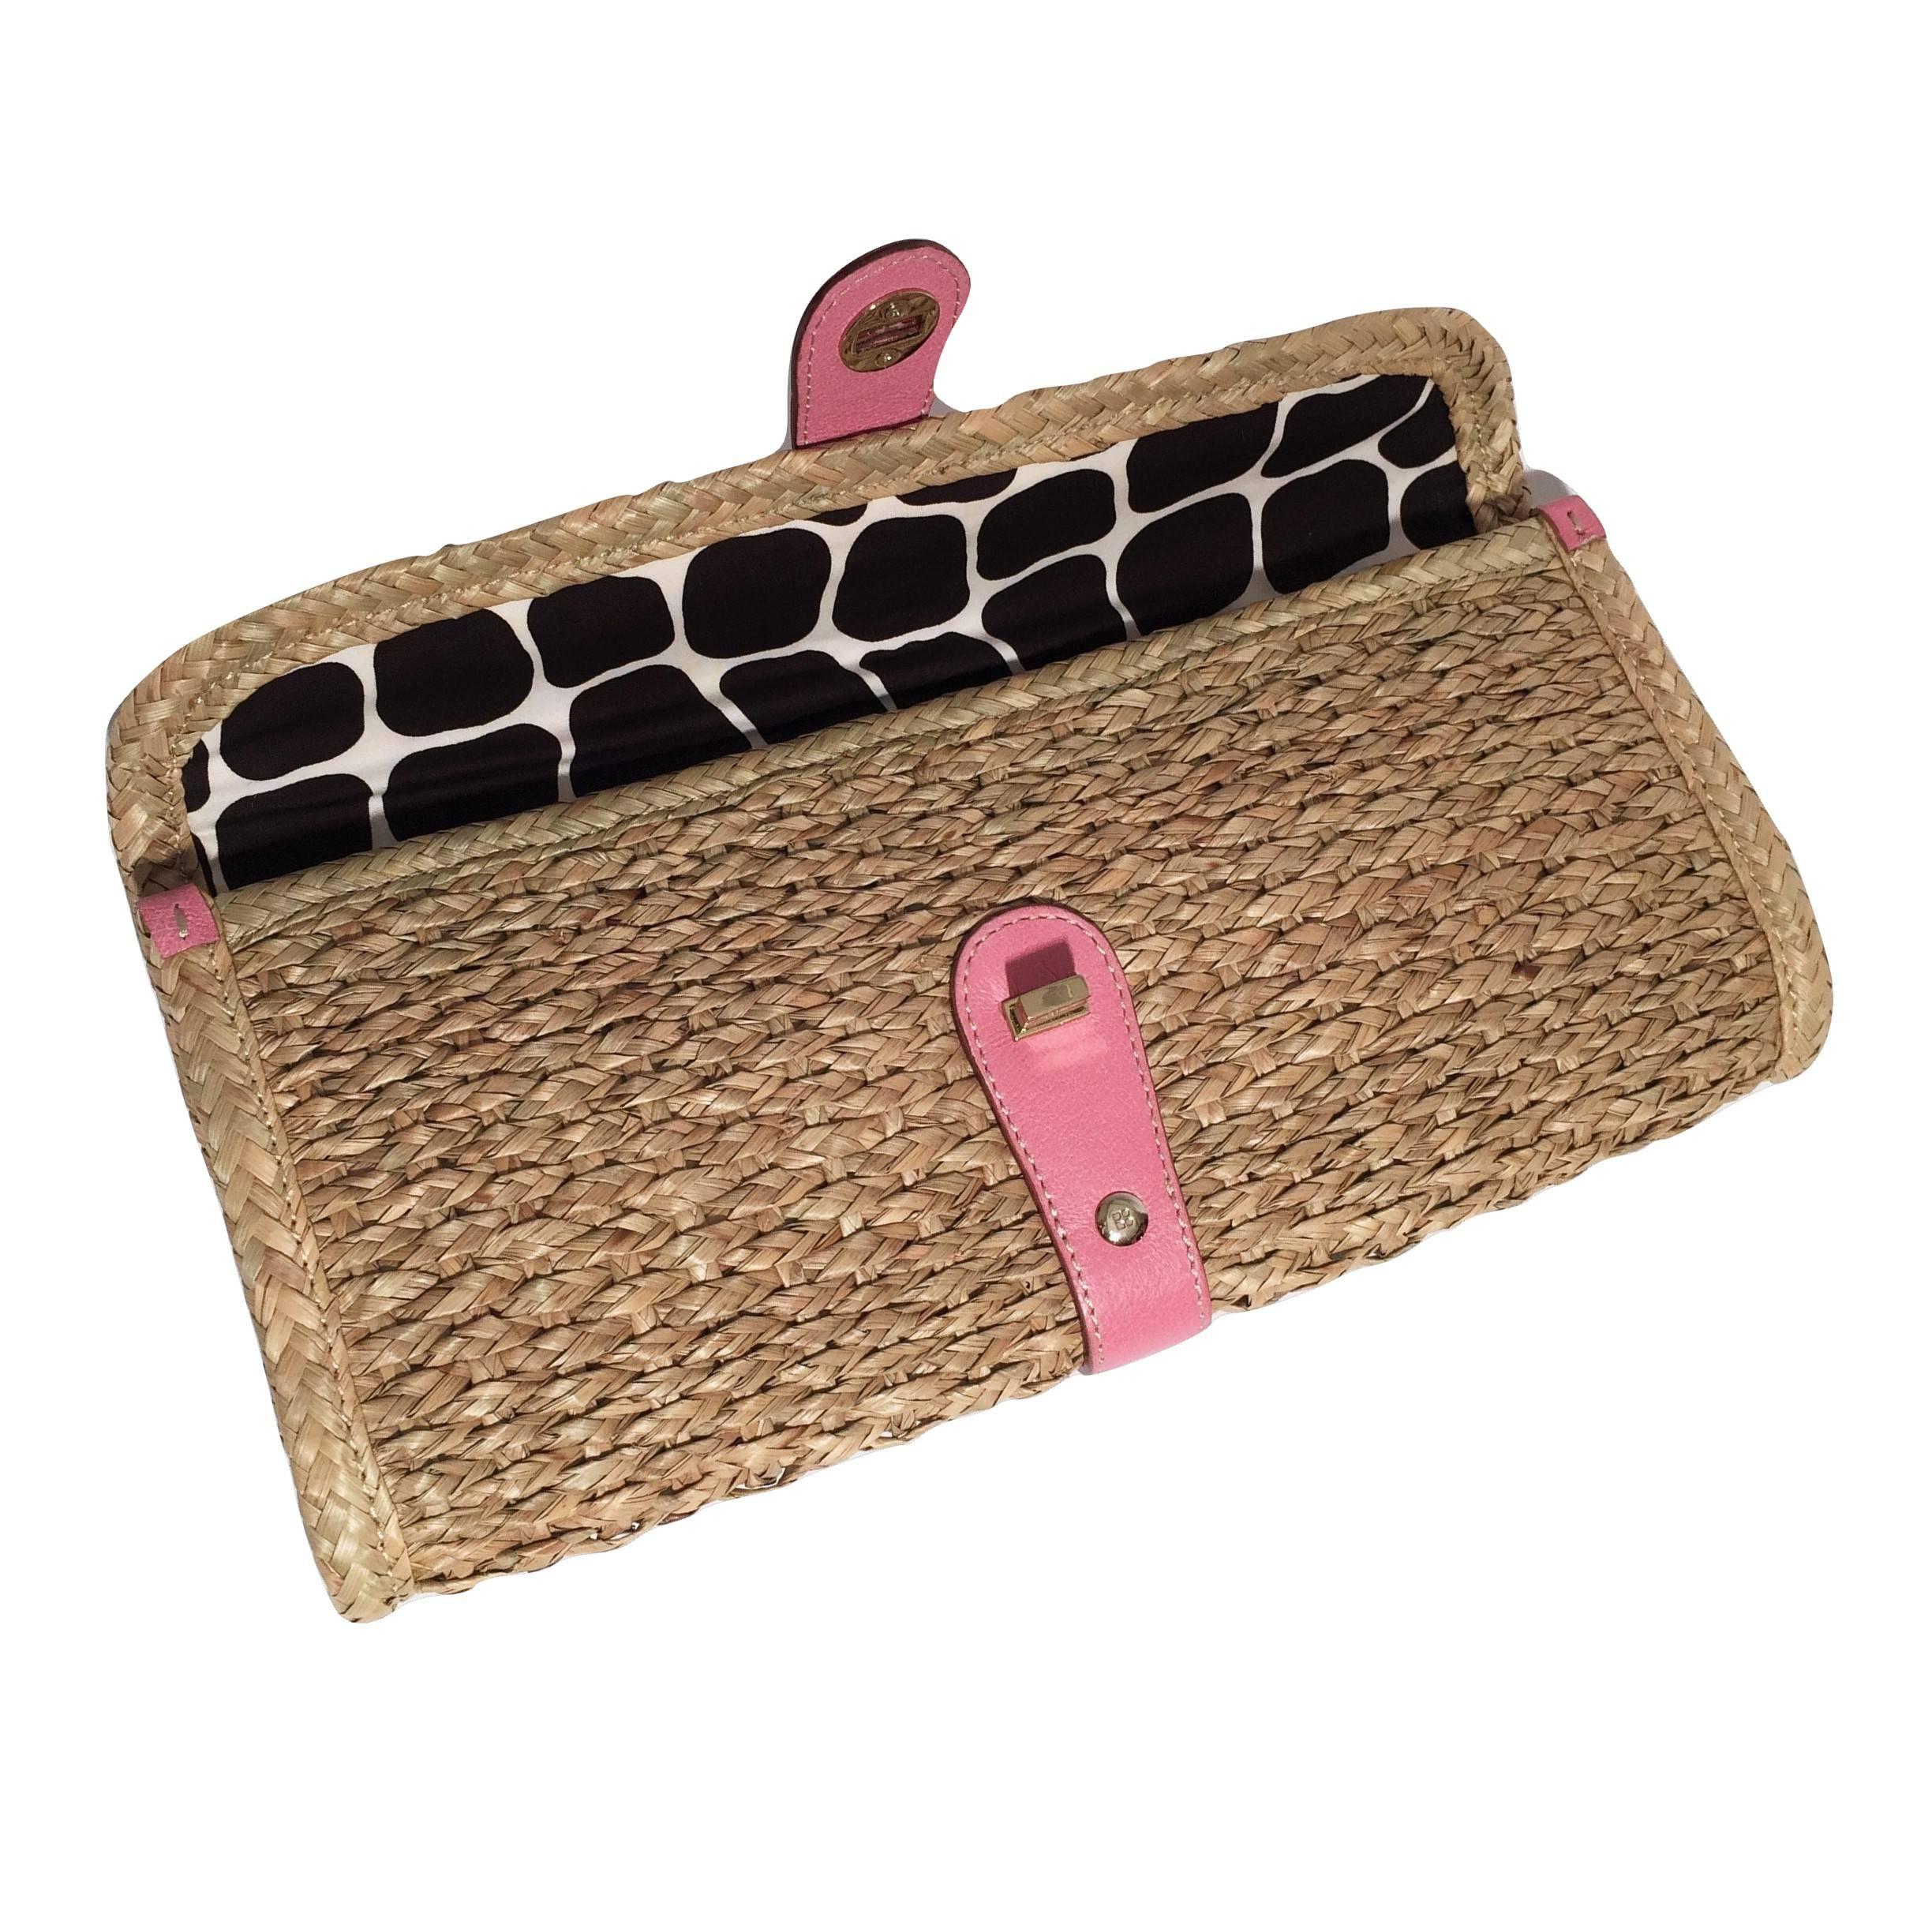 New Spring 2005 Collection Kate Spade Wicker Straw Rattan Clutch Bag  5